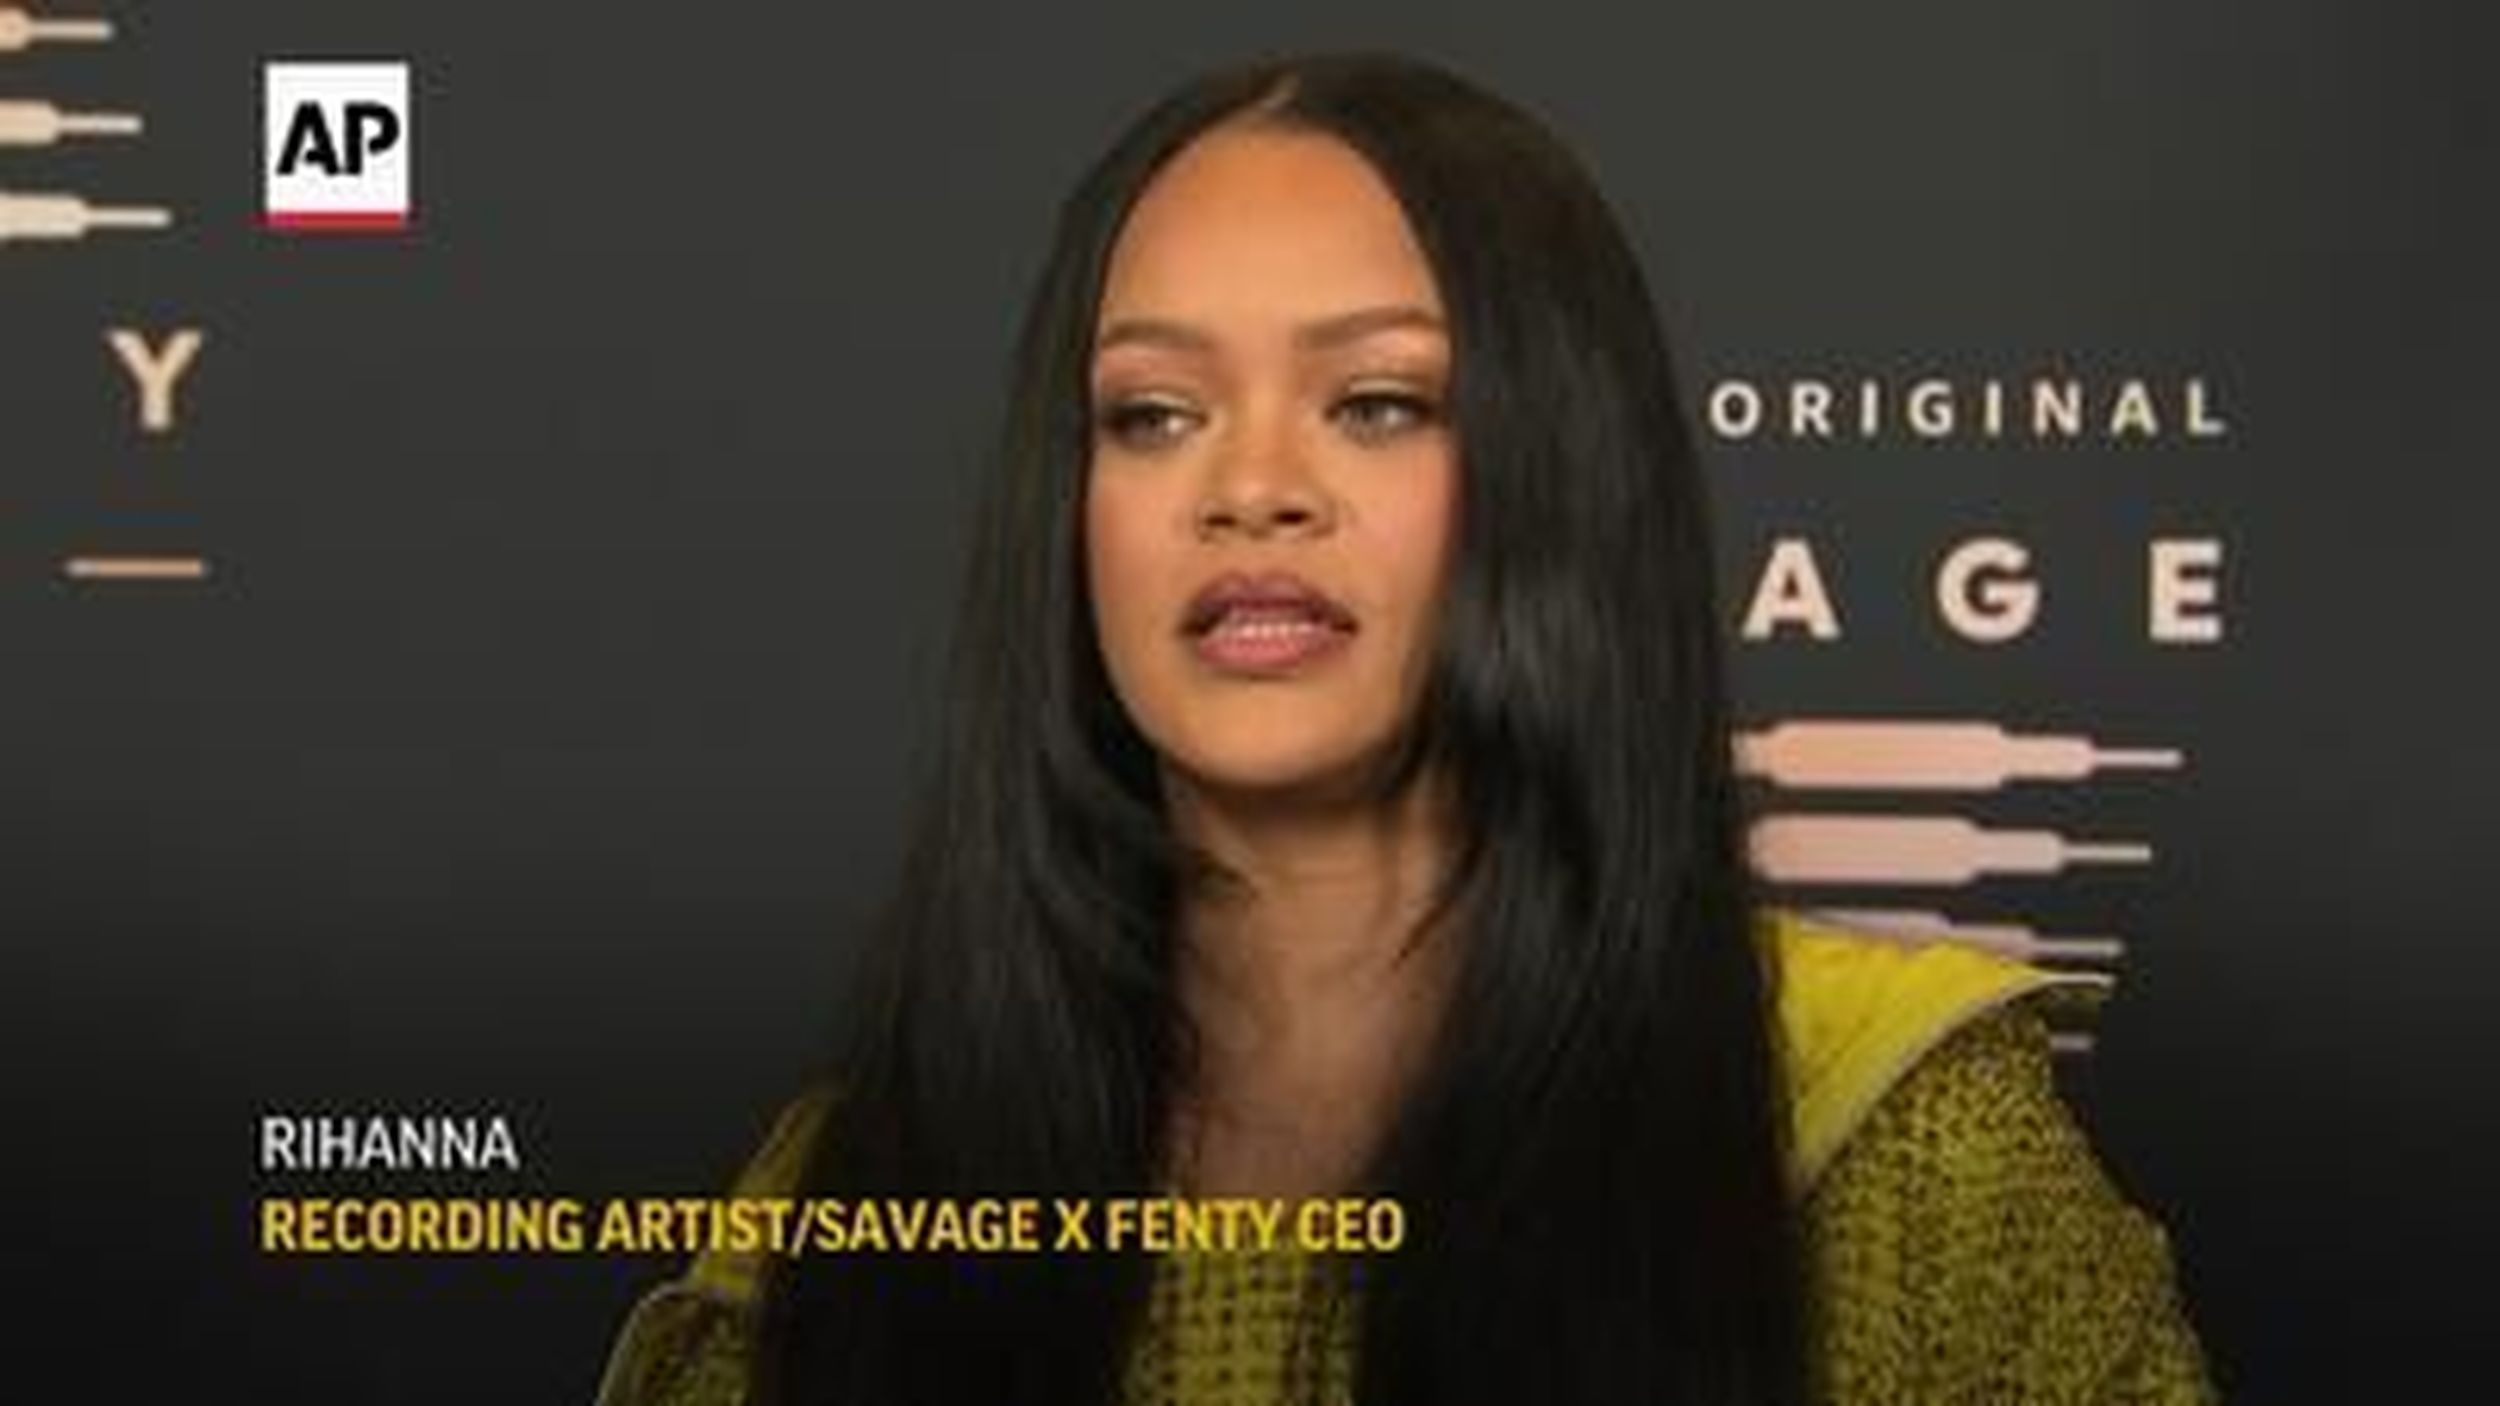 Rihanna's Savage X Fenty Clothing Line Comes to Westchester